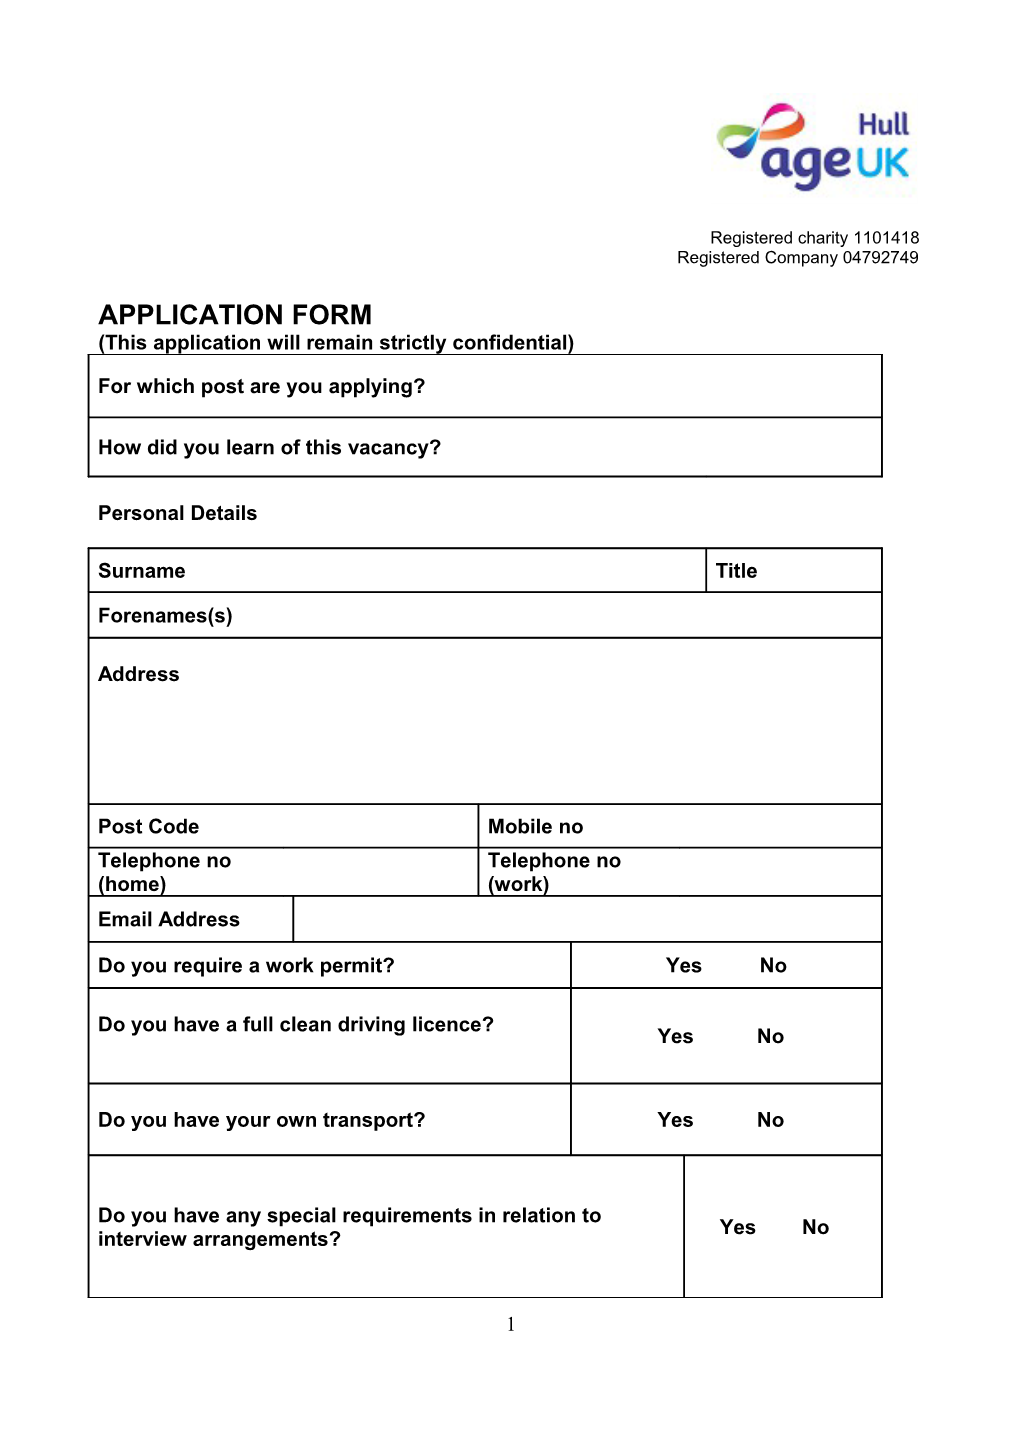 This Application Will Remain Strictly Confidential